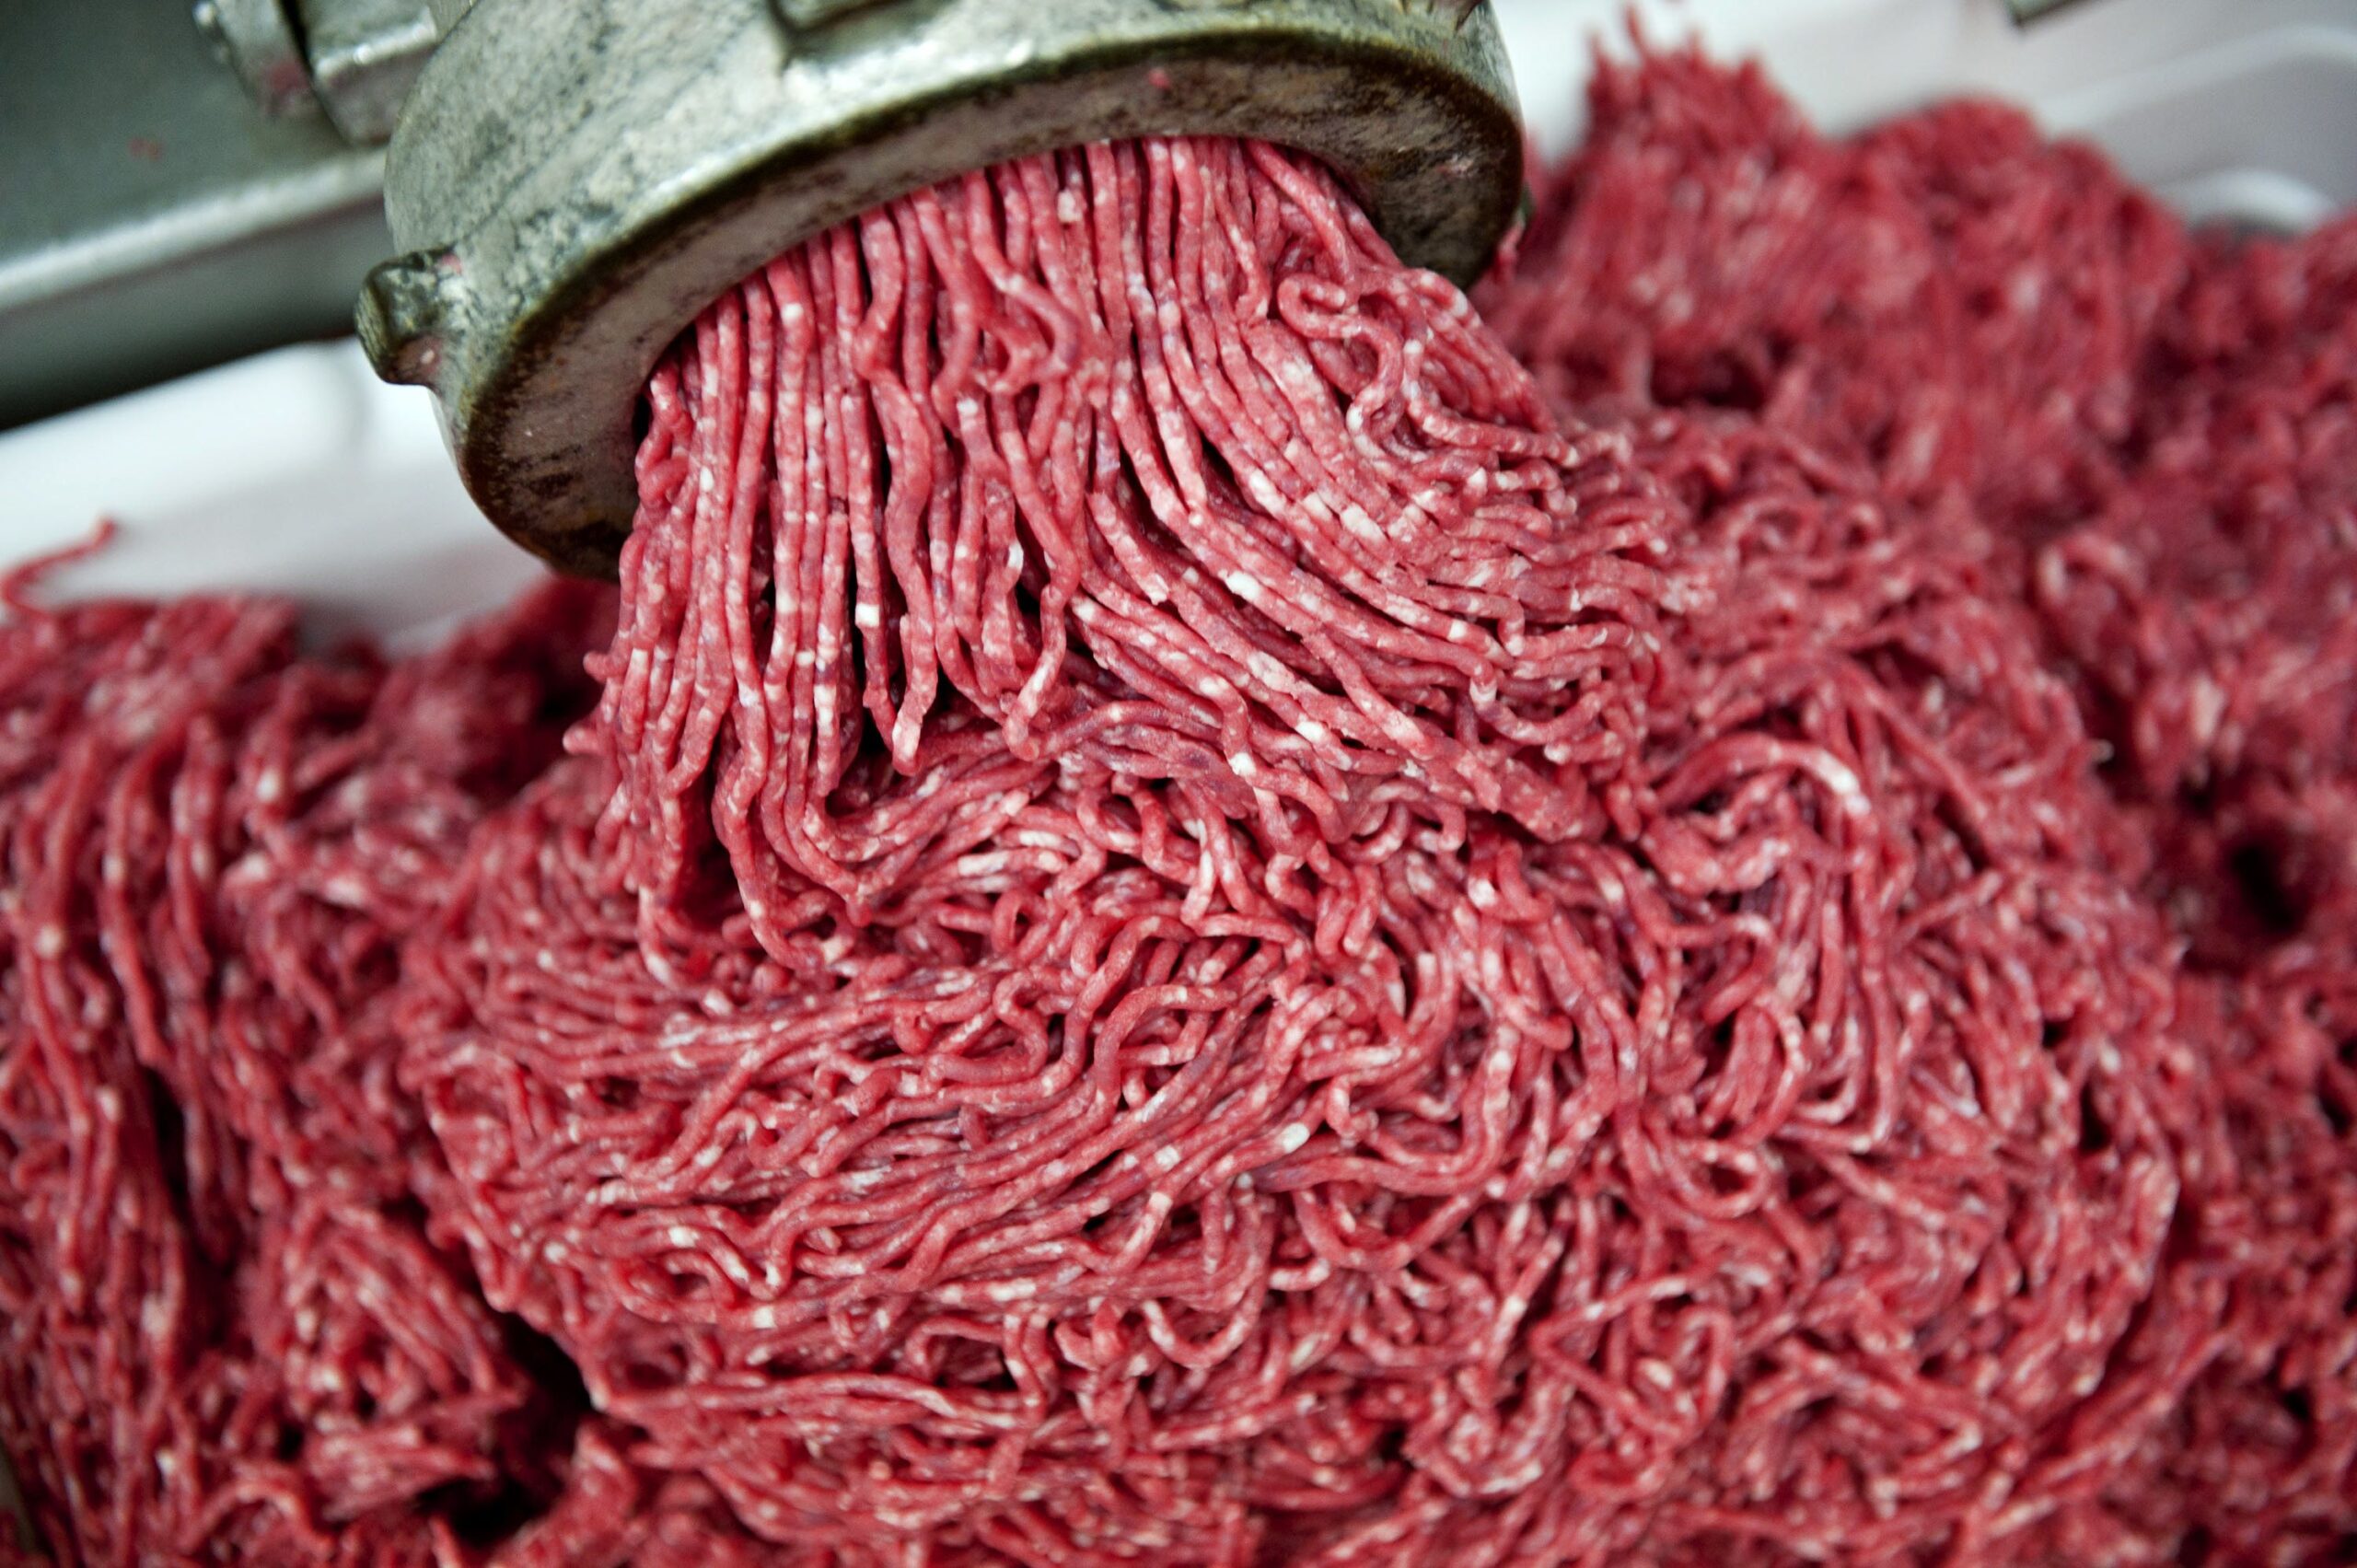 Public Health Officials in Illinois warn about a Salmonella outbreak in ground beef